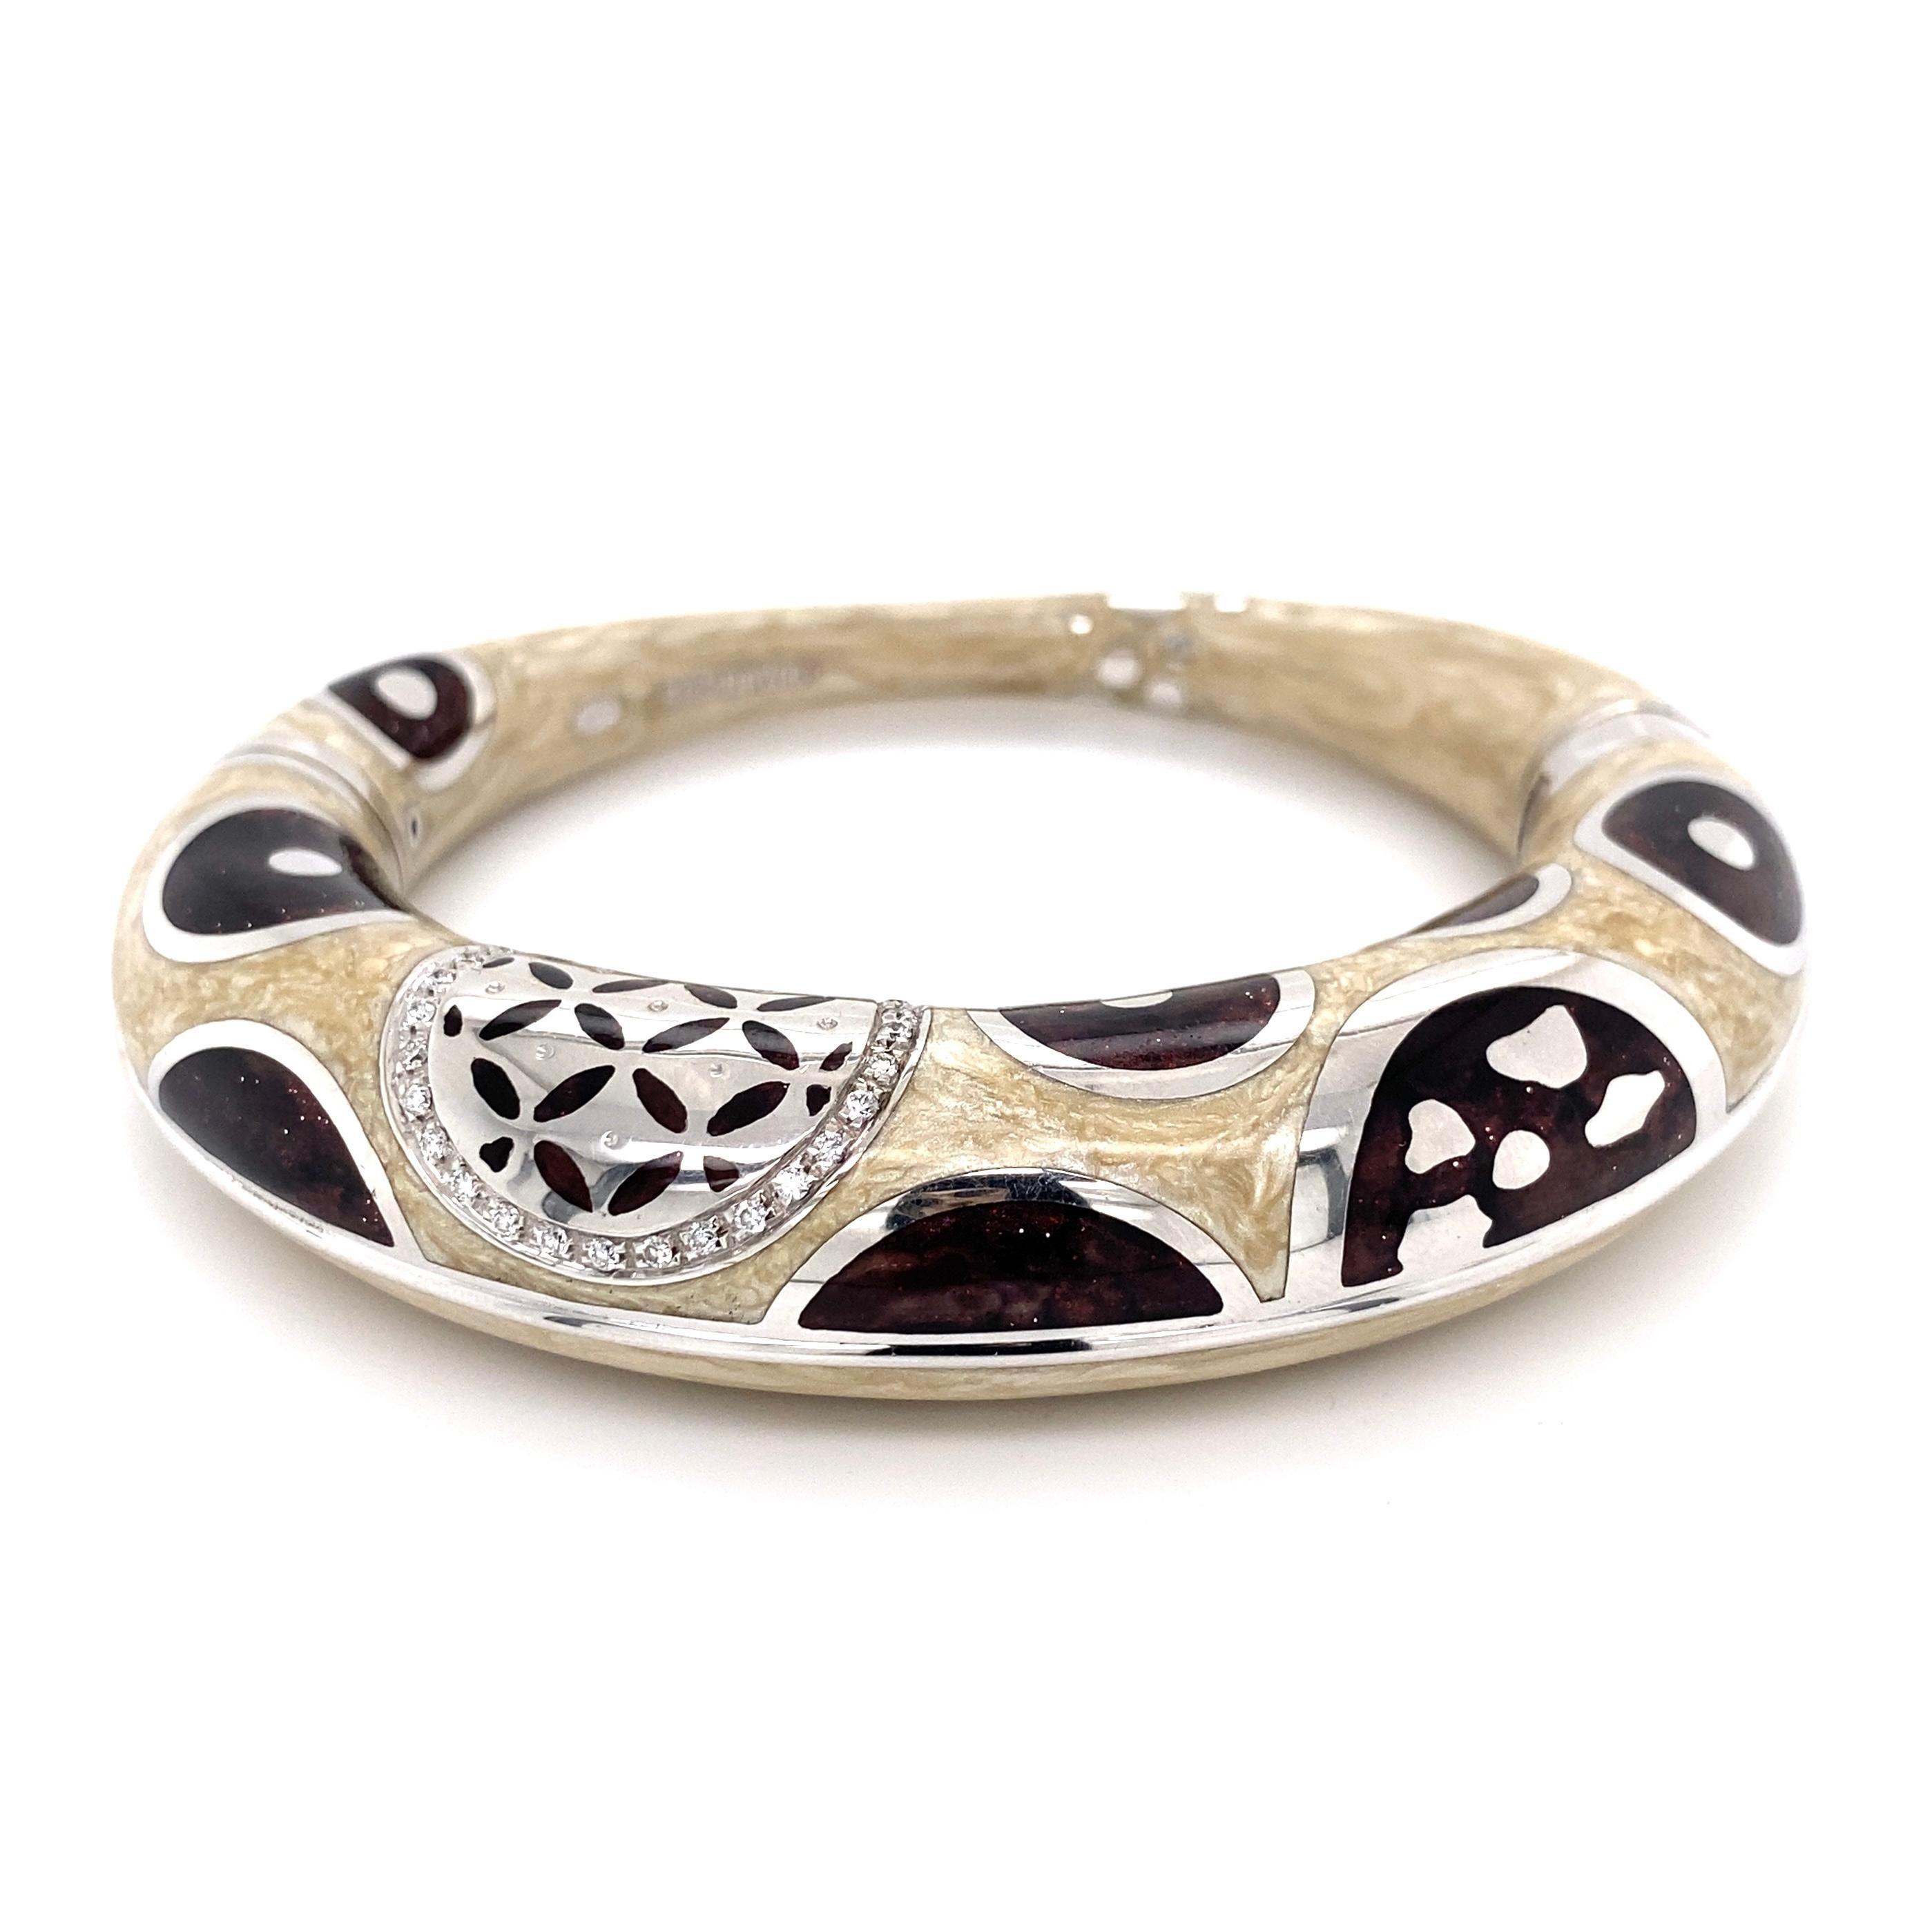 Awesome Enamel and Diamond Gold Bangle Cuff Bracelet. Hand set with round Brilliant Diamonds, weighing approx. 0.30tcw. Beautifully Hand crafted White and Burgundy abstract designs, in 18K White Gold and 925. Measuring approx. 2.85” x 3.35” x 0.67”.